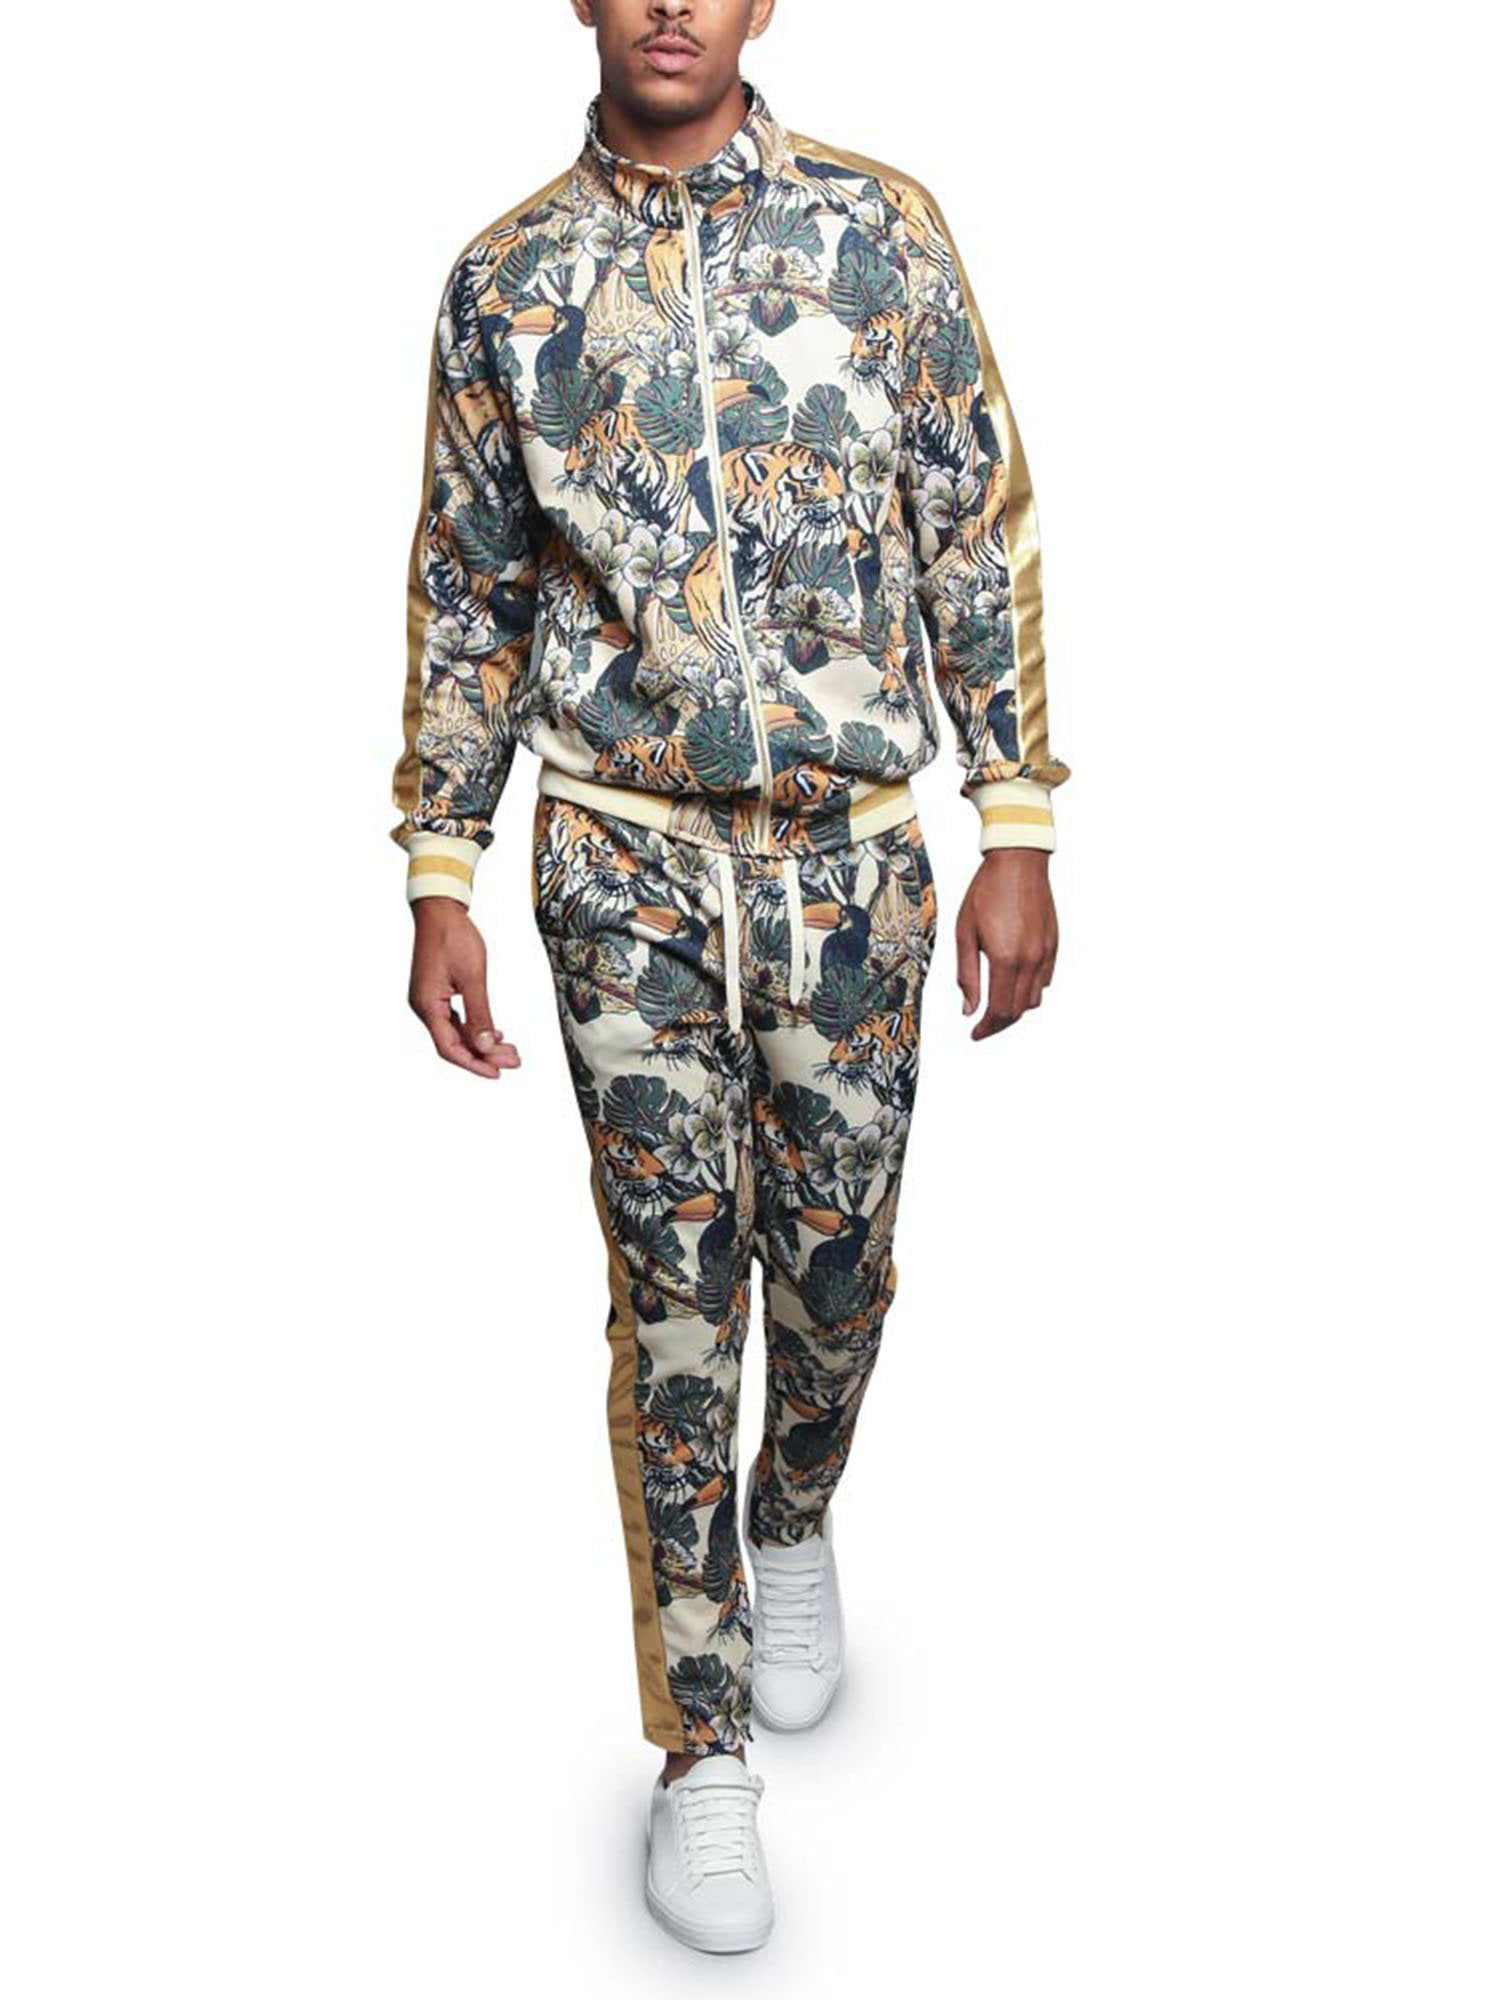 G-Style USA Royal Floral Tiger Track Suit